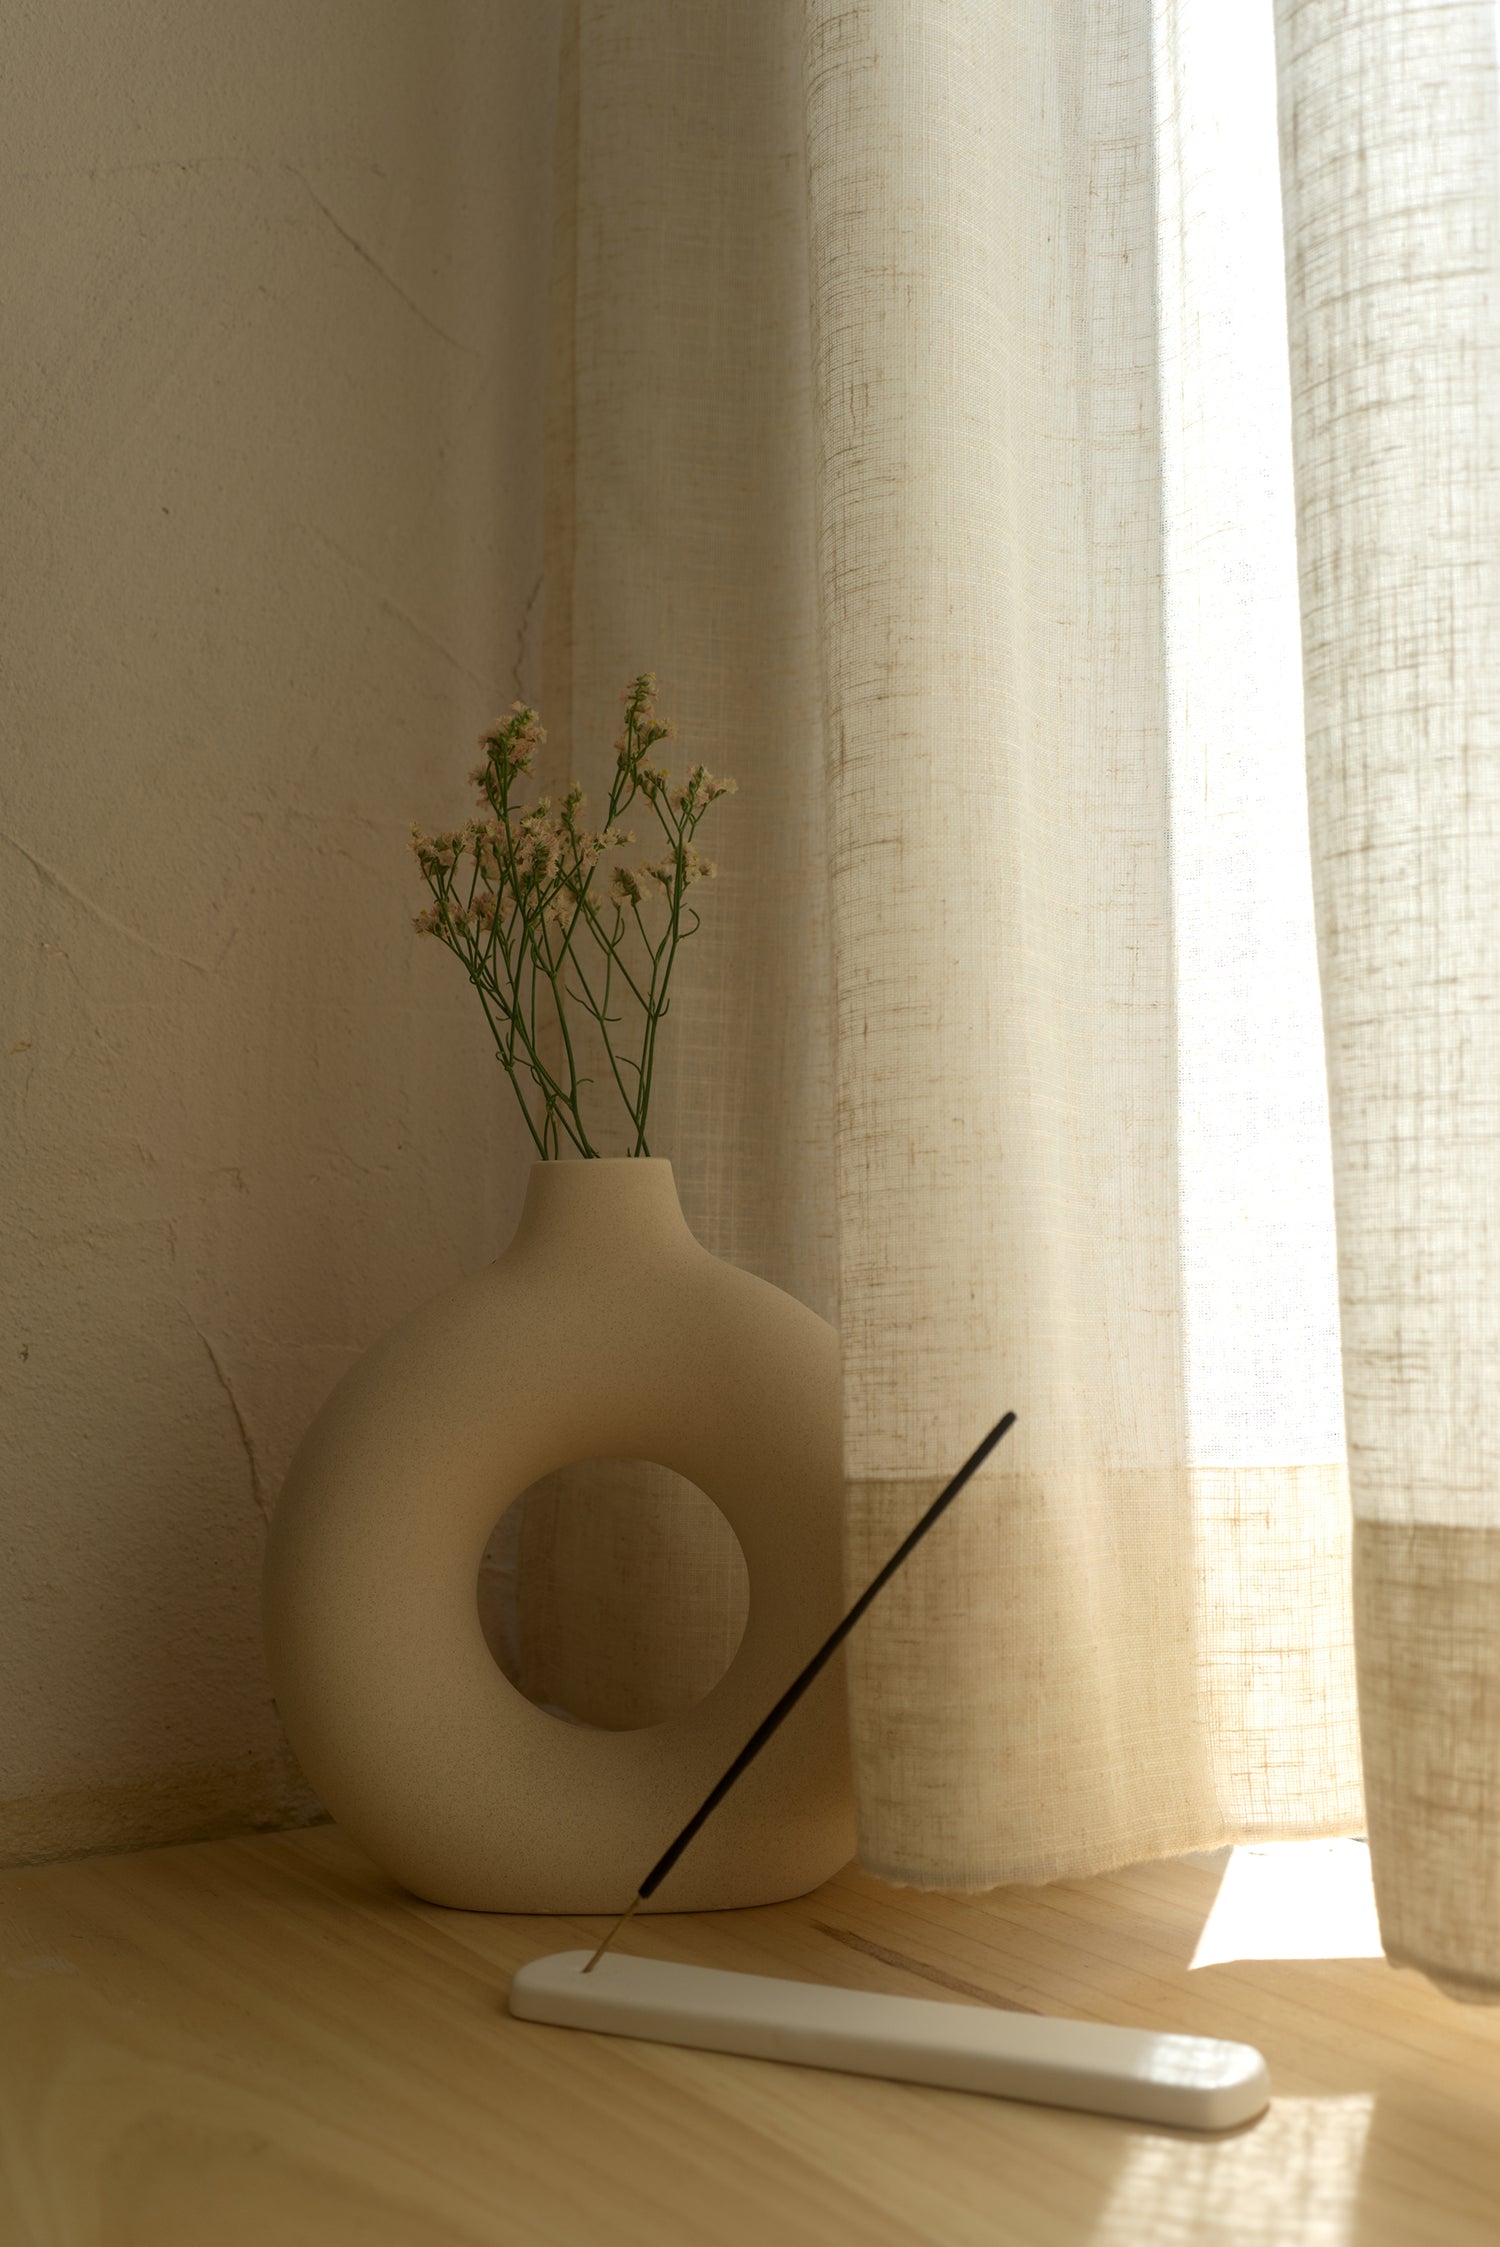 incense holder and incense in front of a beautiful vase with flowers